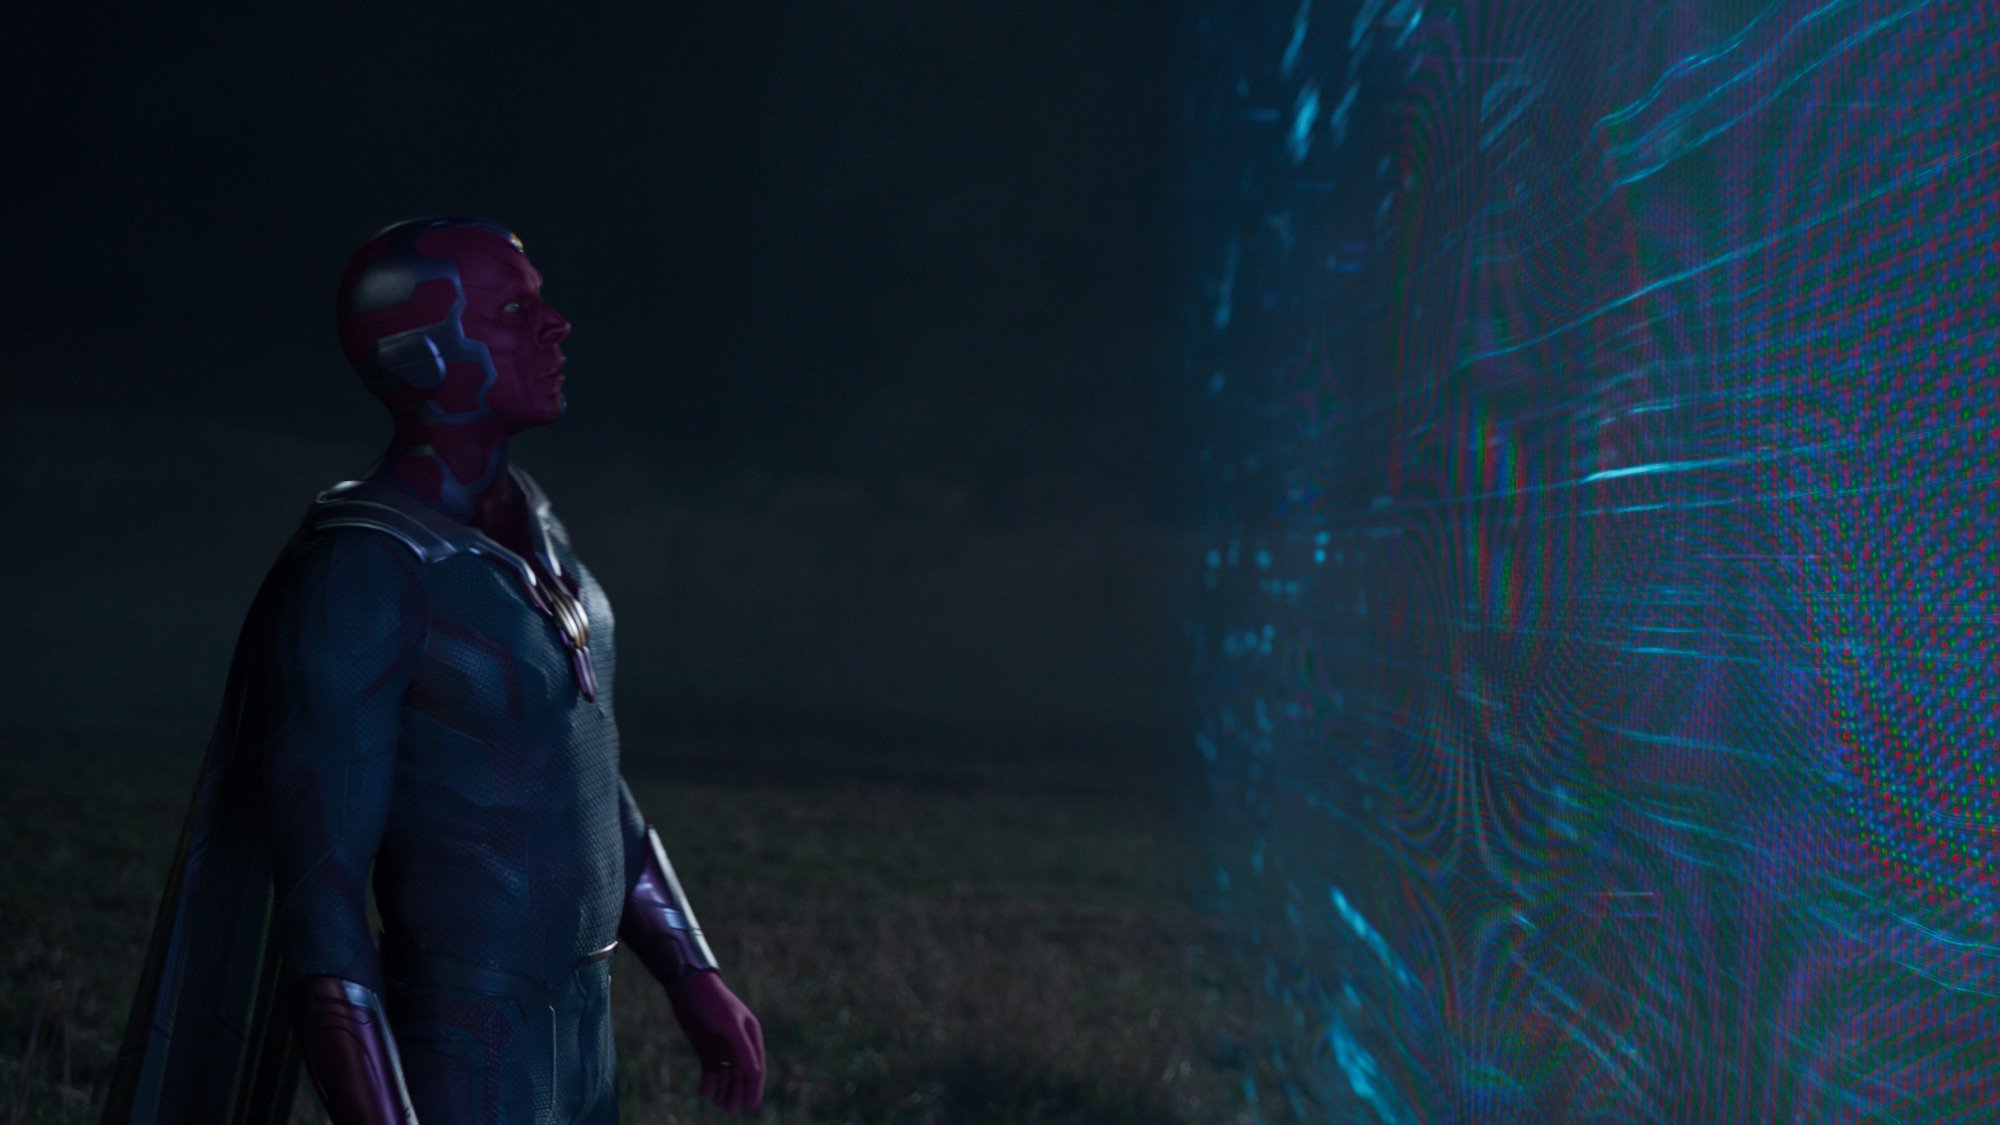 Paul Bettany as Vision in 'WandaVision' Episode 6, almost outside of the Hex